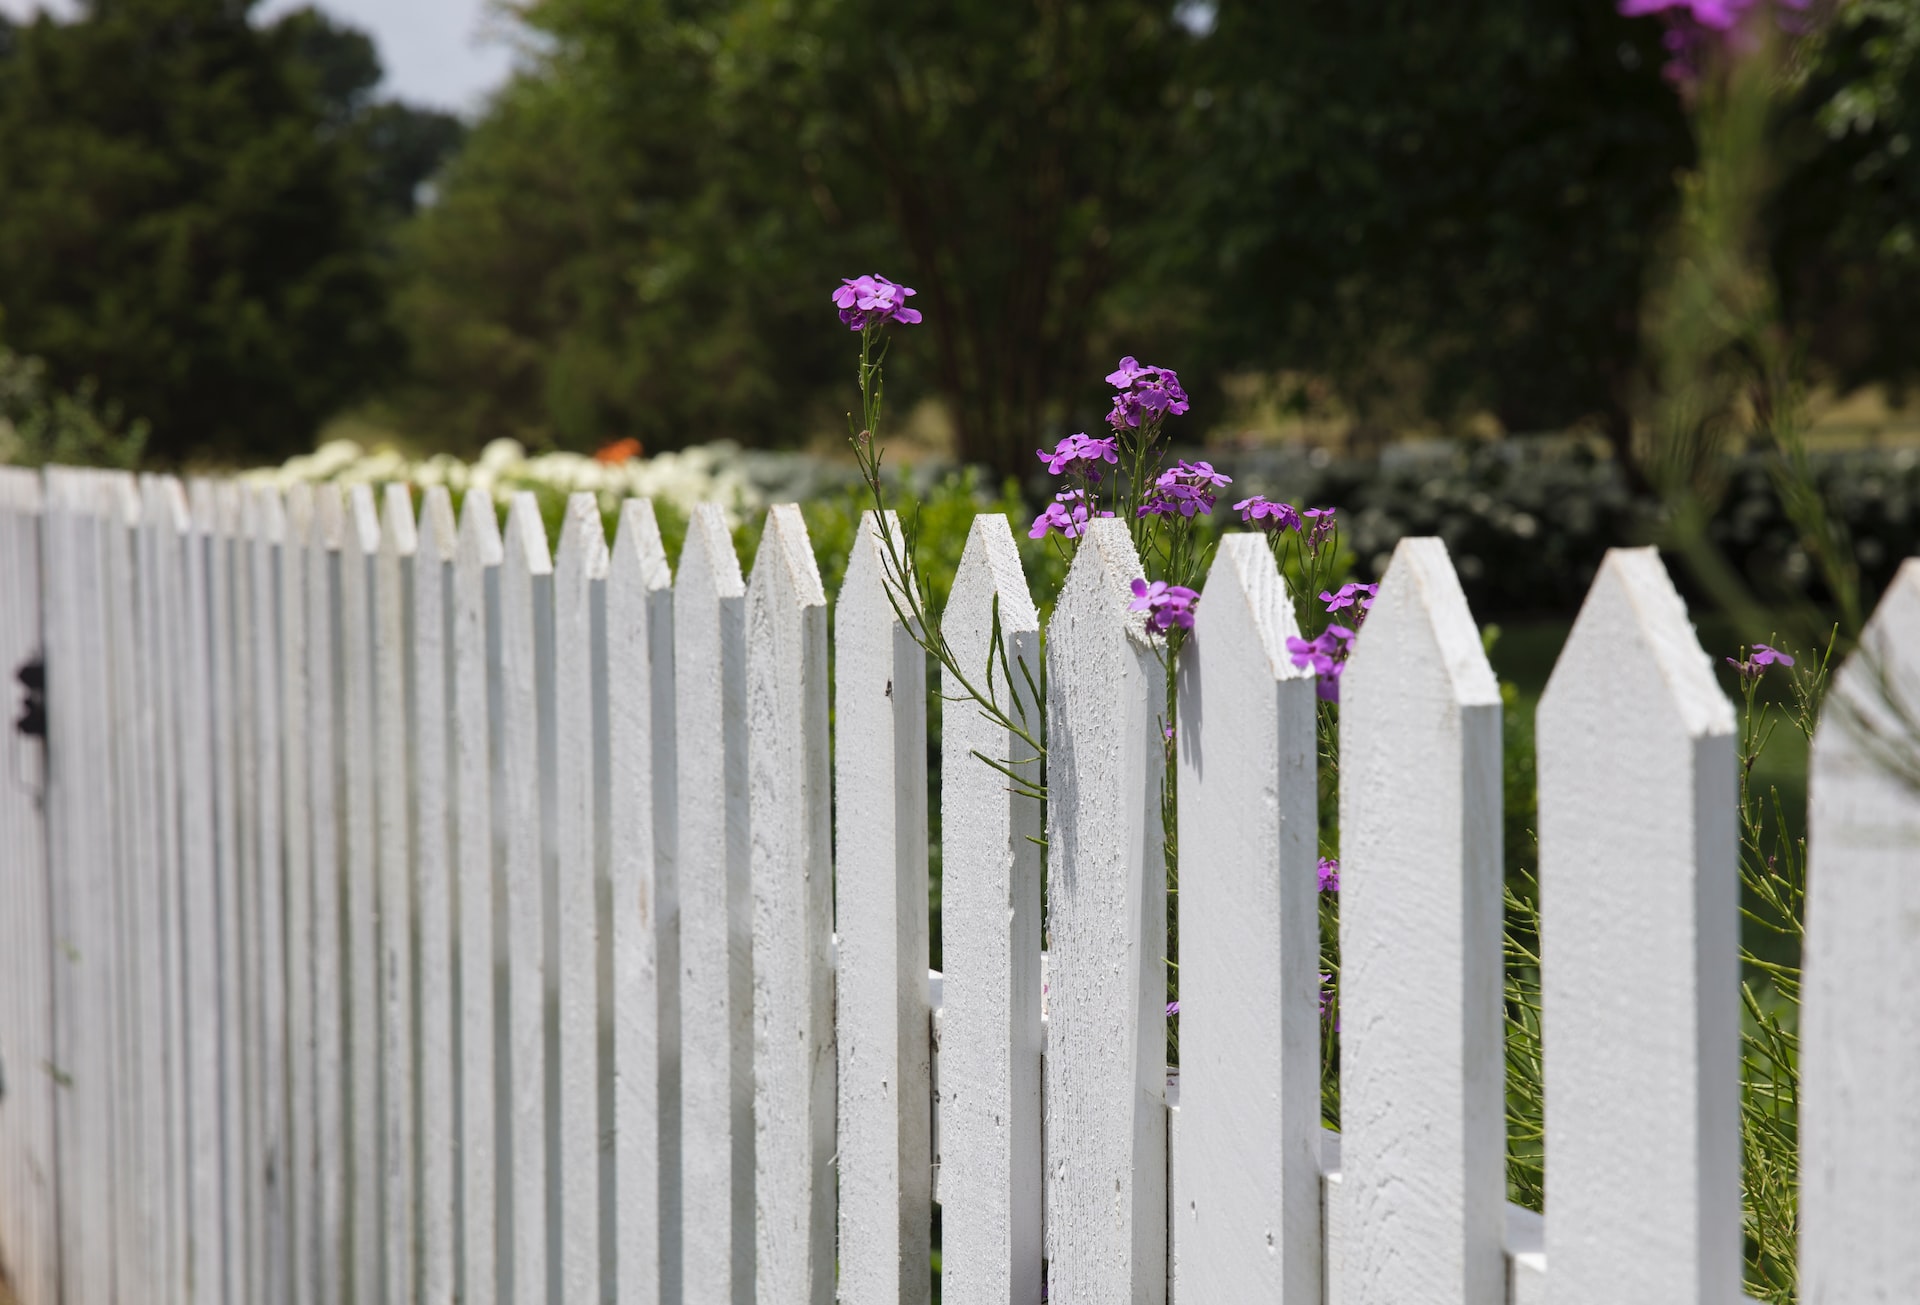 How to choose the perfect fence for your garden?